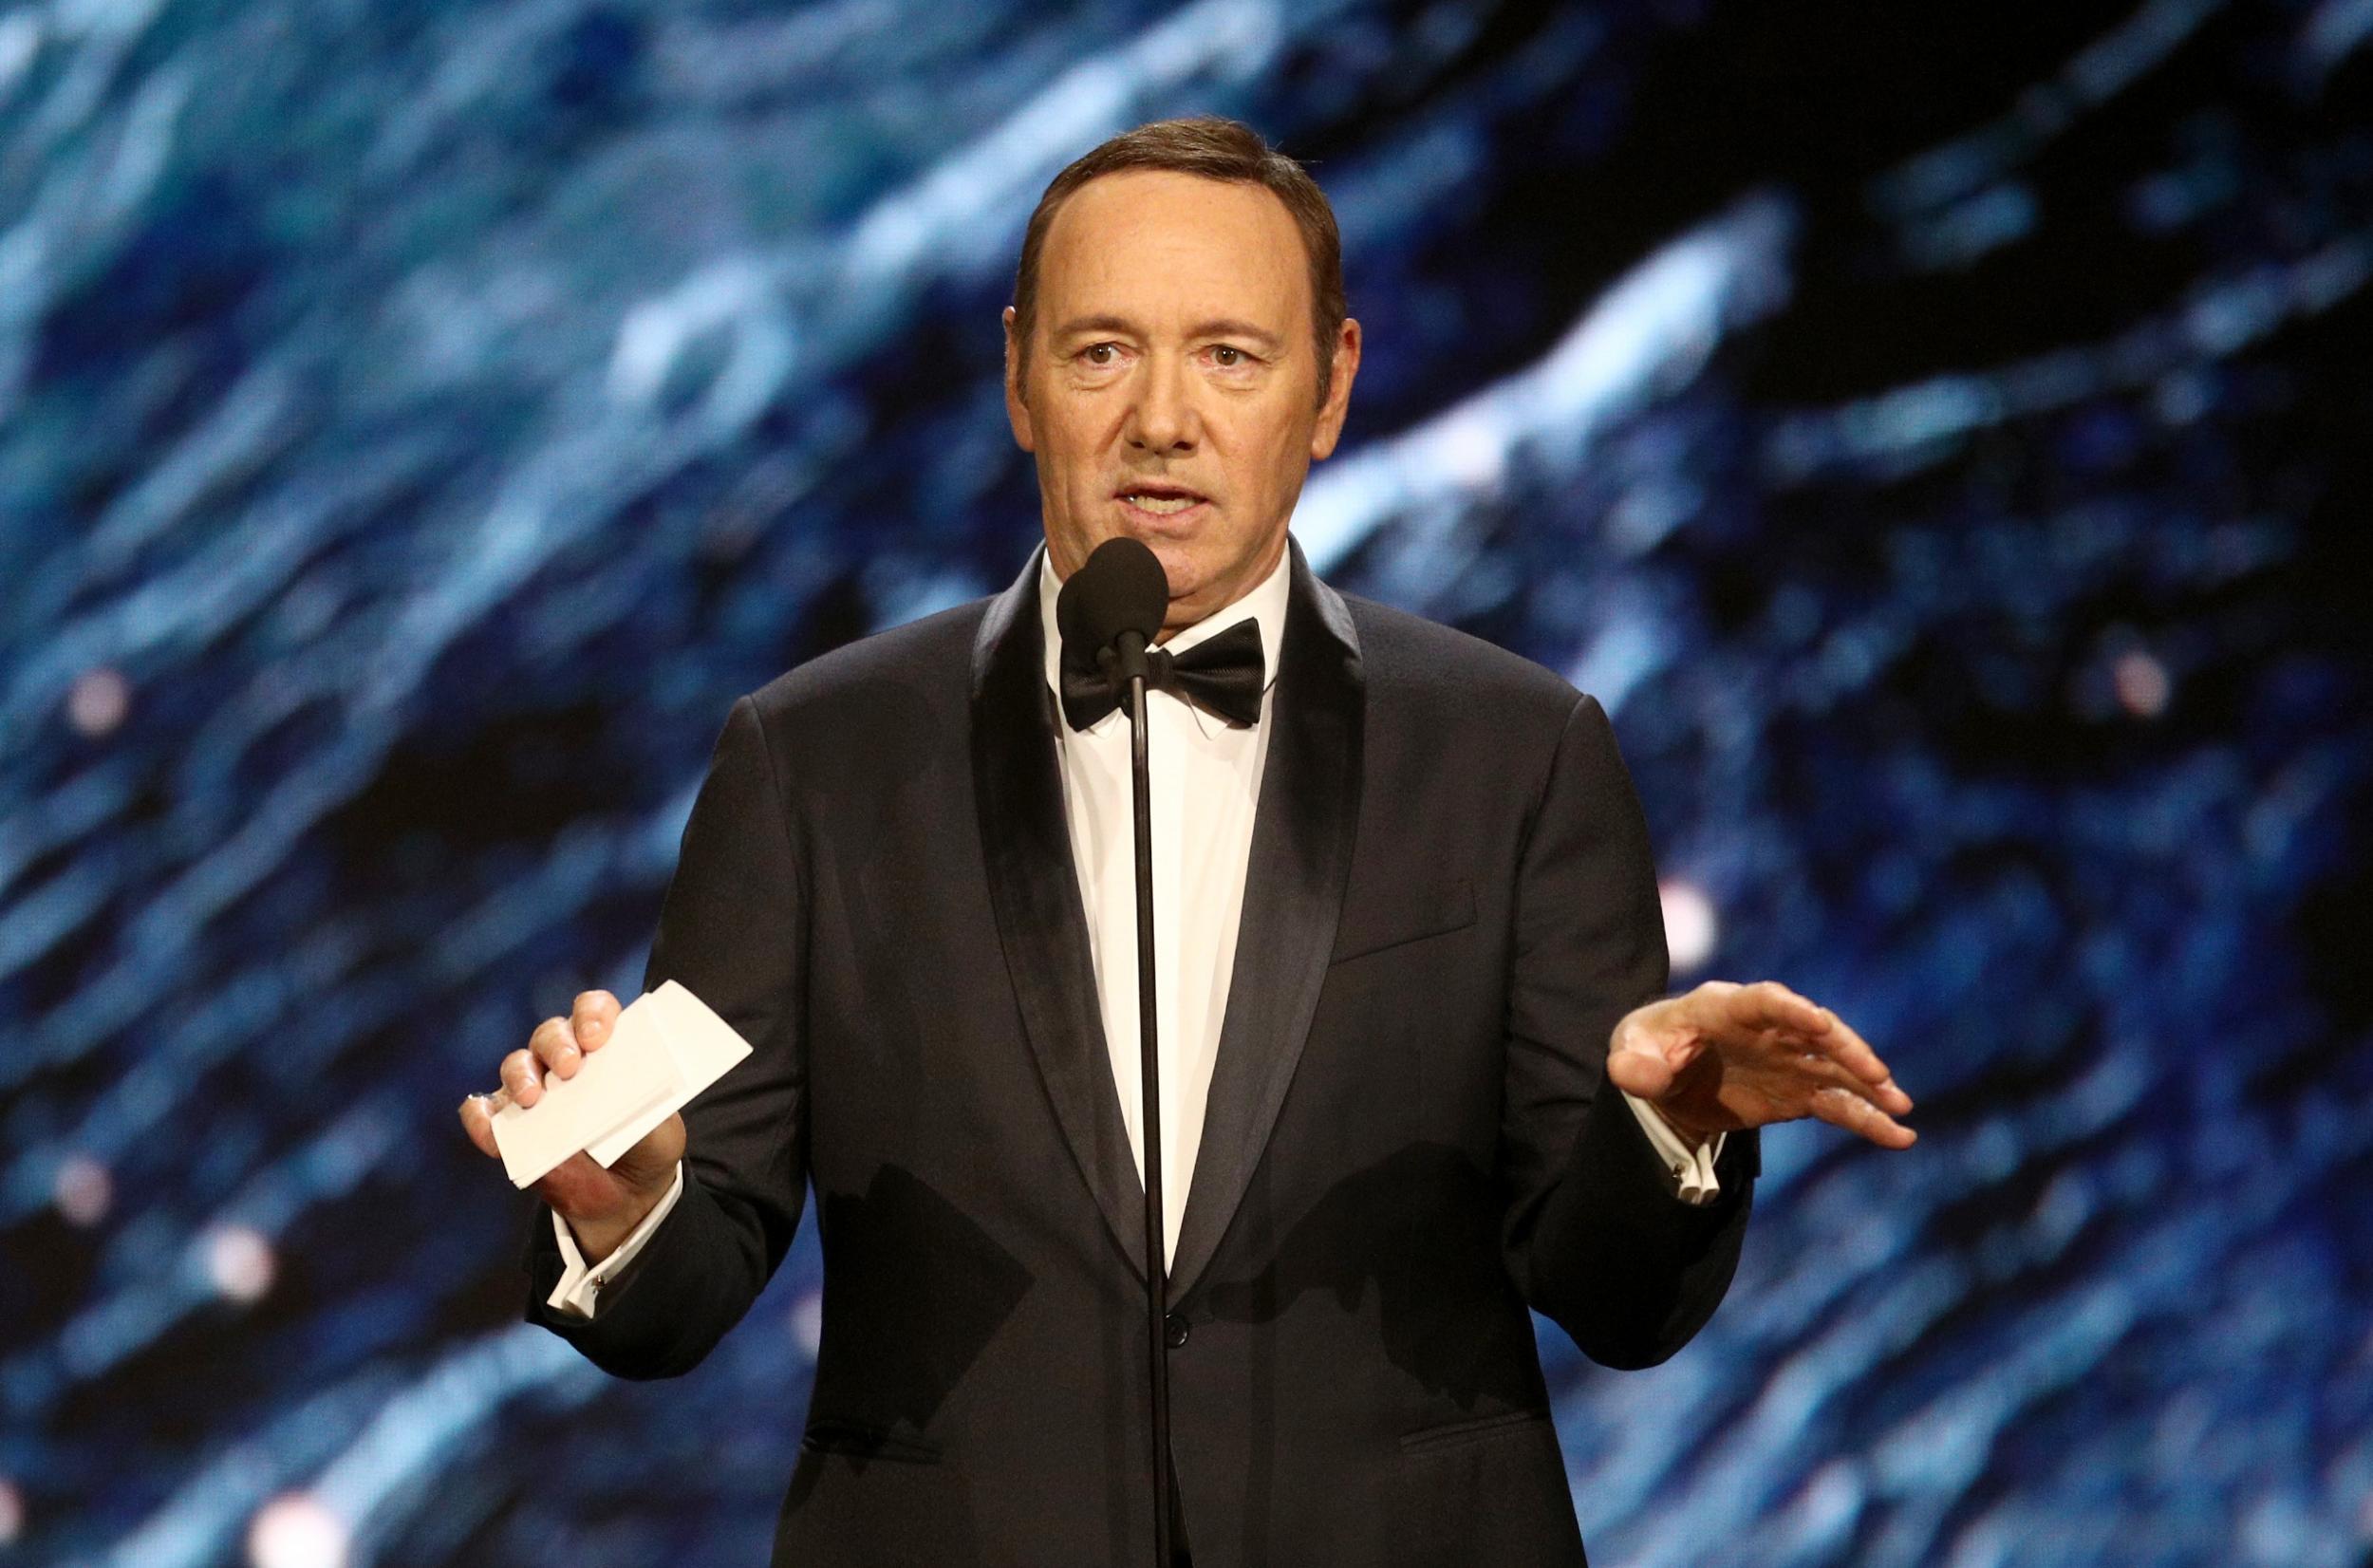 Kevin Spacey onstage to present Britannia Award for Excellence in Television on October 27, 2017 in Beverly Hills, California. (Credit: Frederick M. Brown/Getty Images)